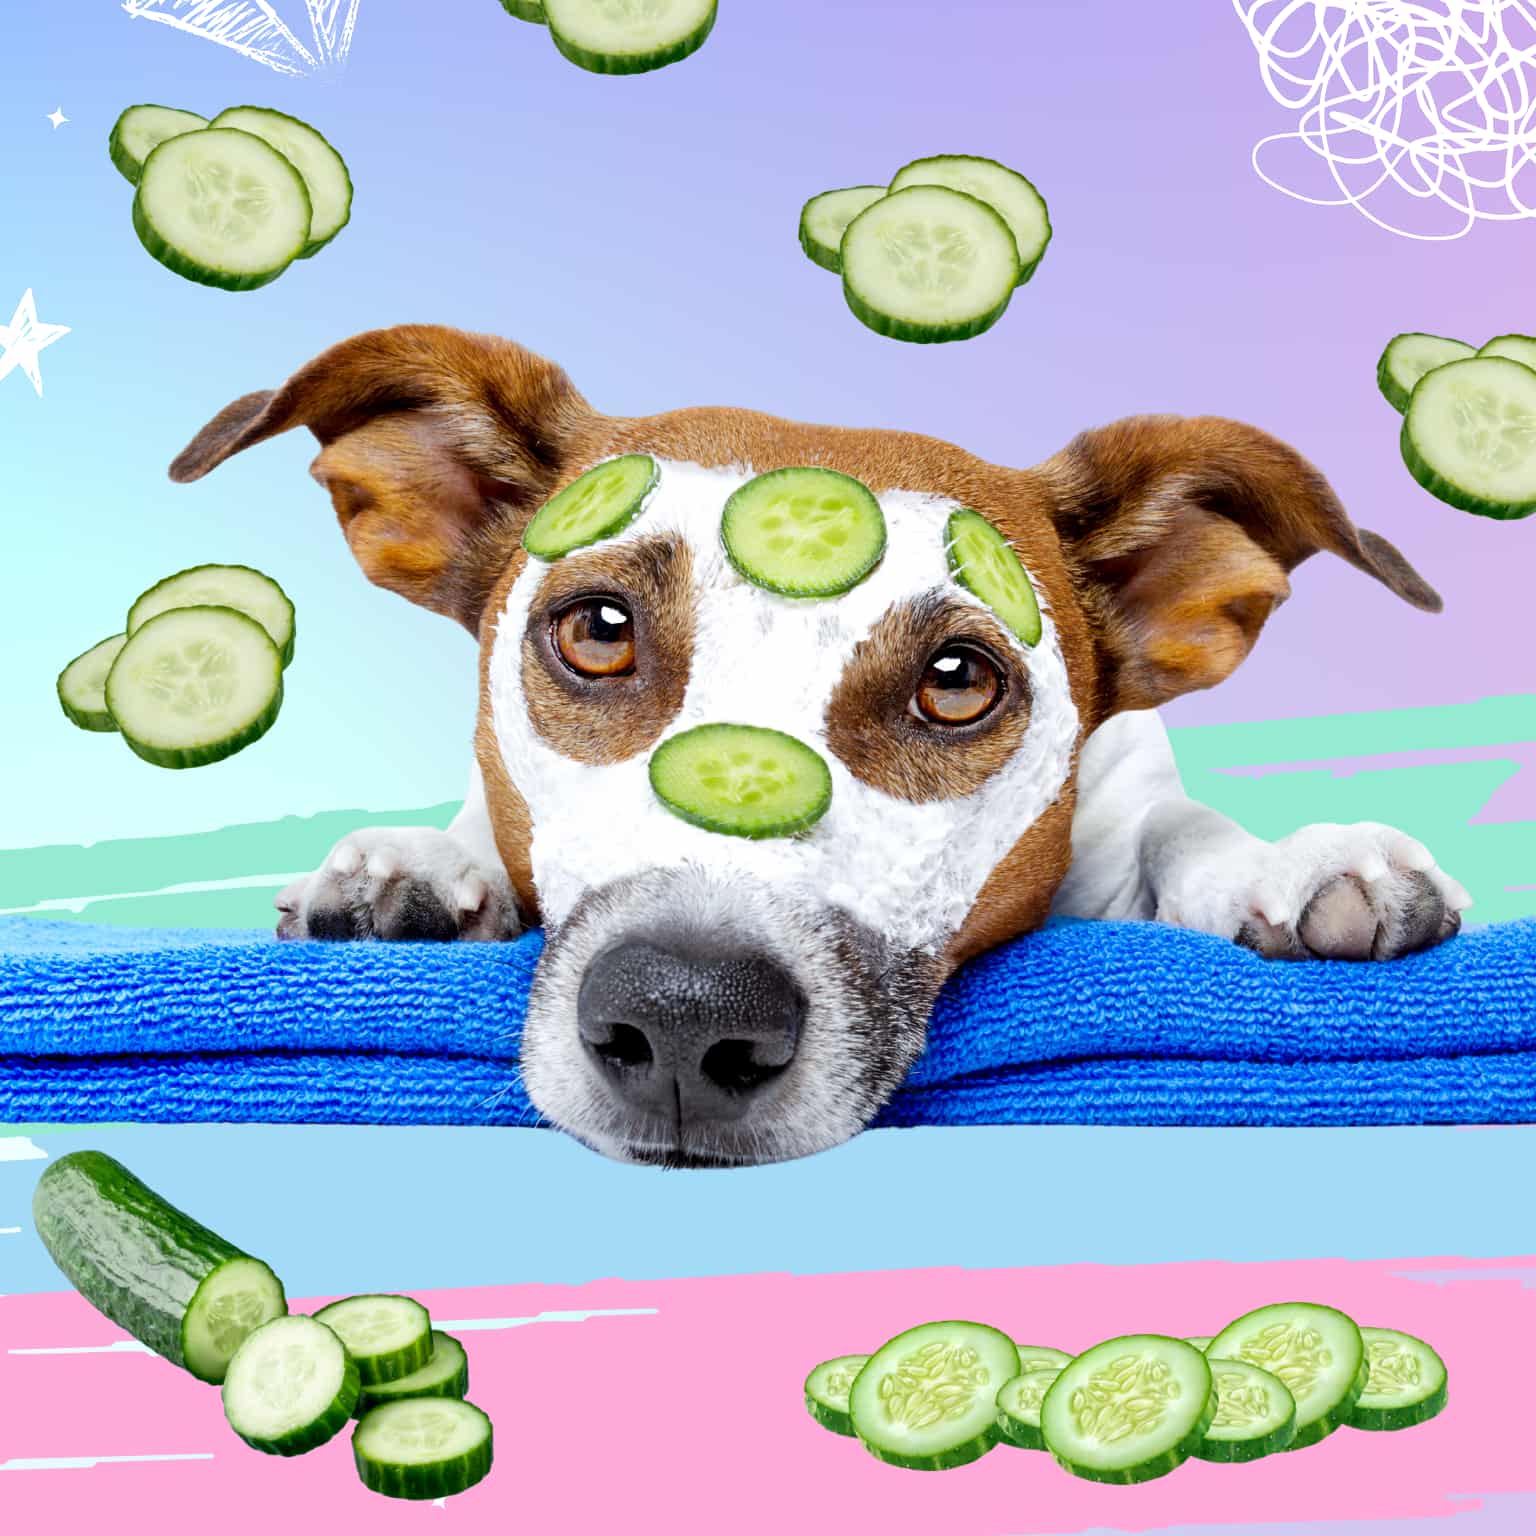 Dog with cucumbers on his face